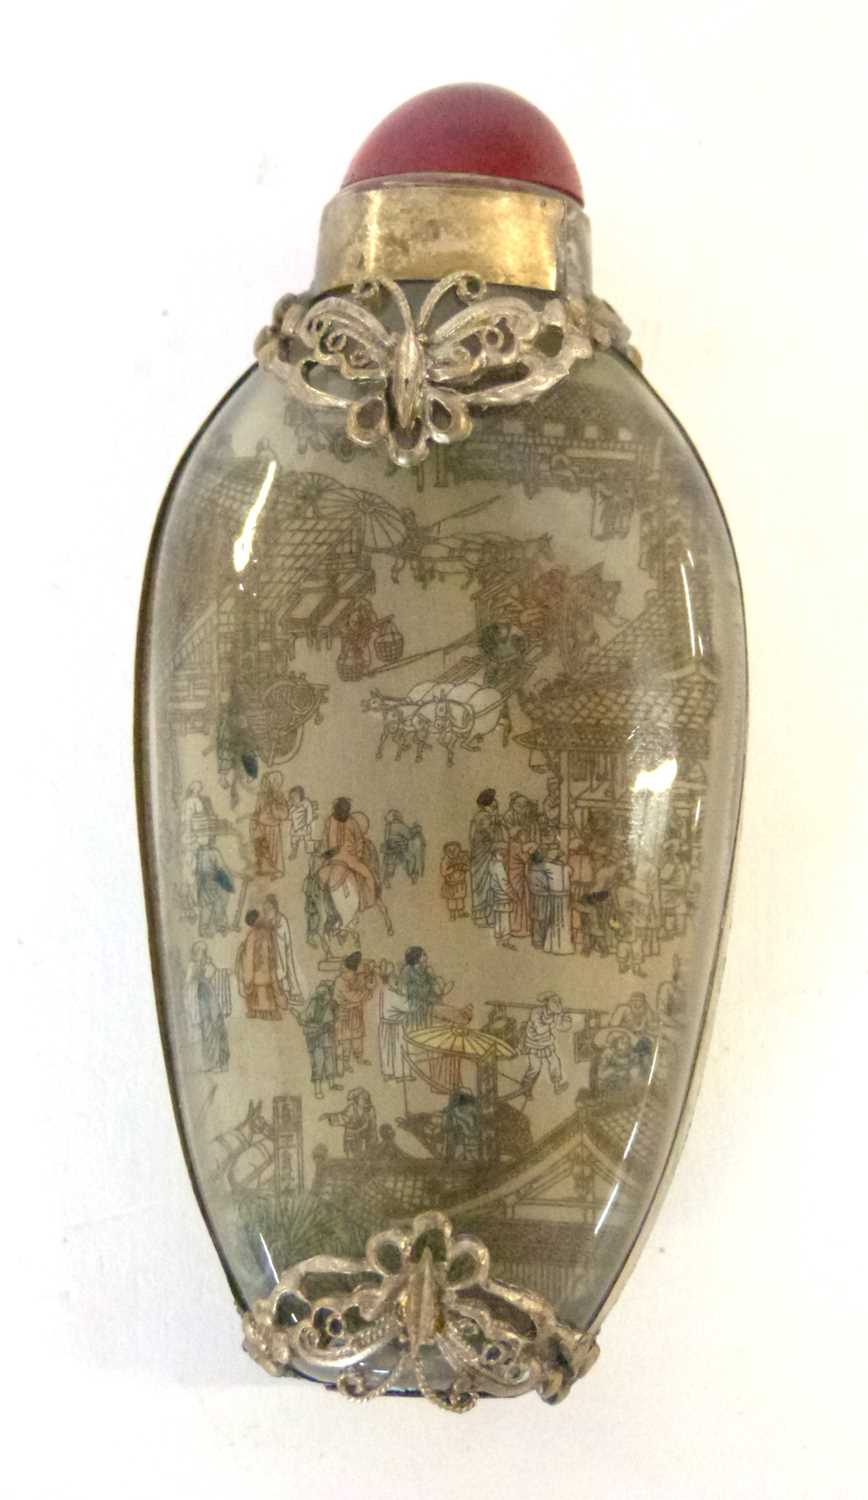 Antique Chinese reverse-painted snuff bottle with hardstone stopper and decorated with intricate - Image 6 of 8